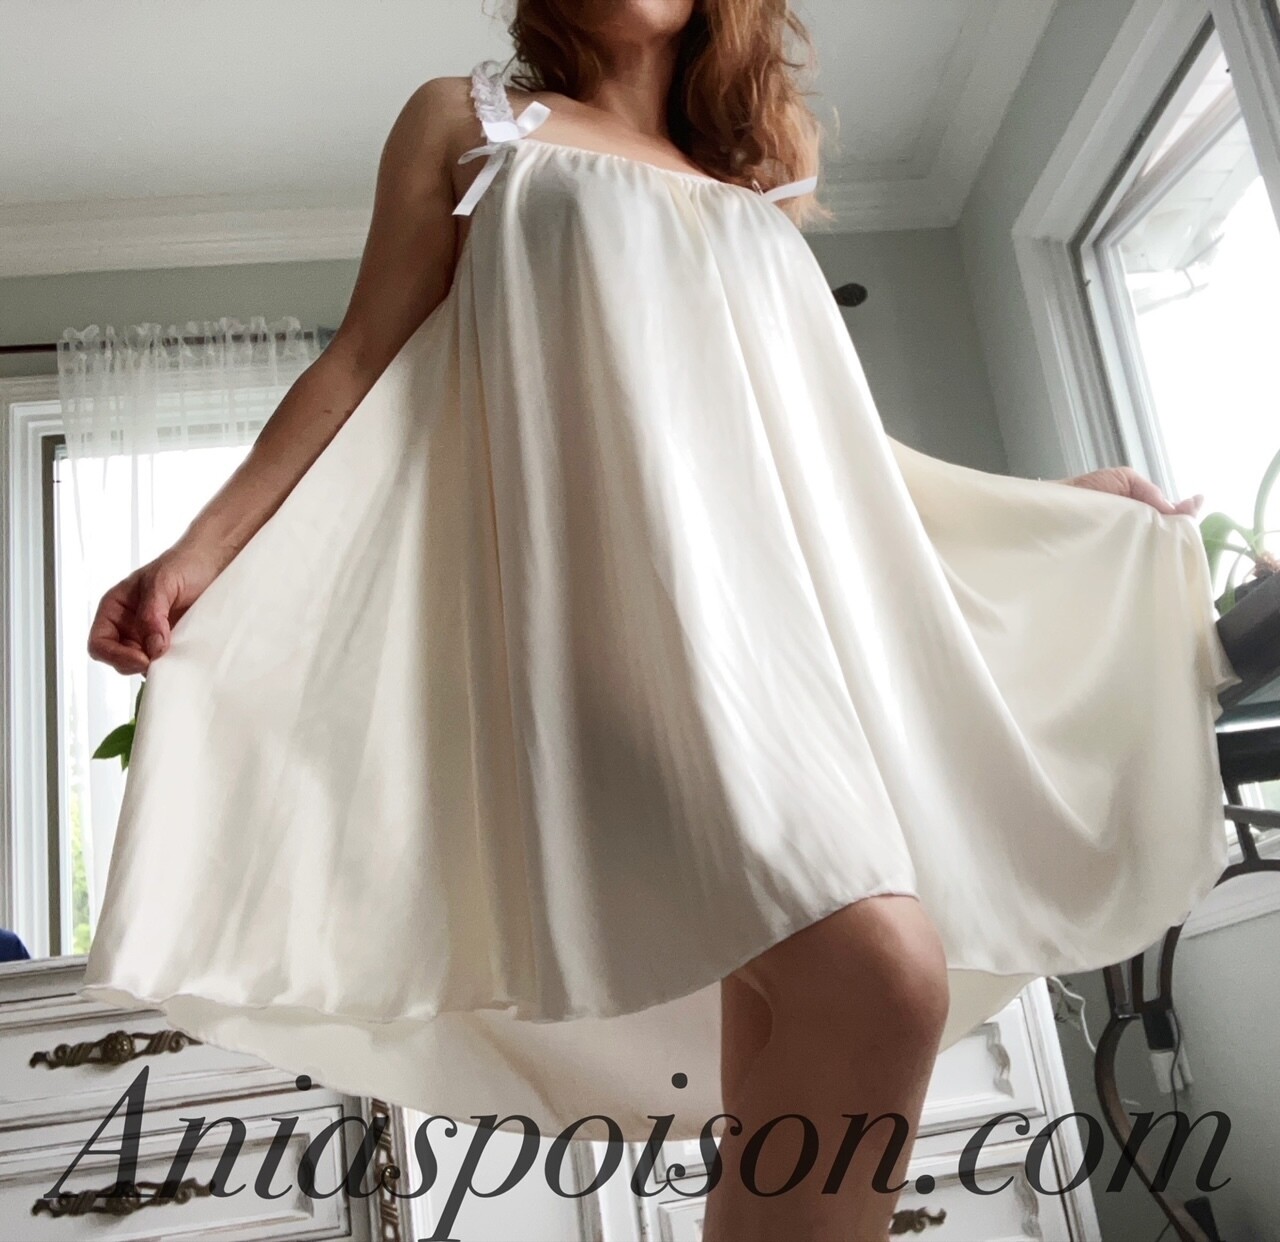 Ania's Poison Vintage style Silky Satin IVORY Smooth and Shiny nightgown Lacy straps Nightie Peignoir OS L XL